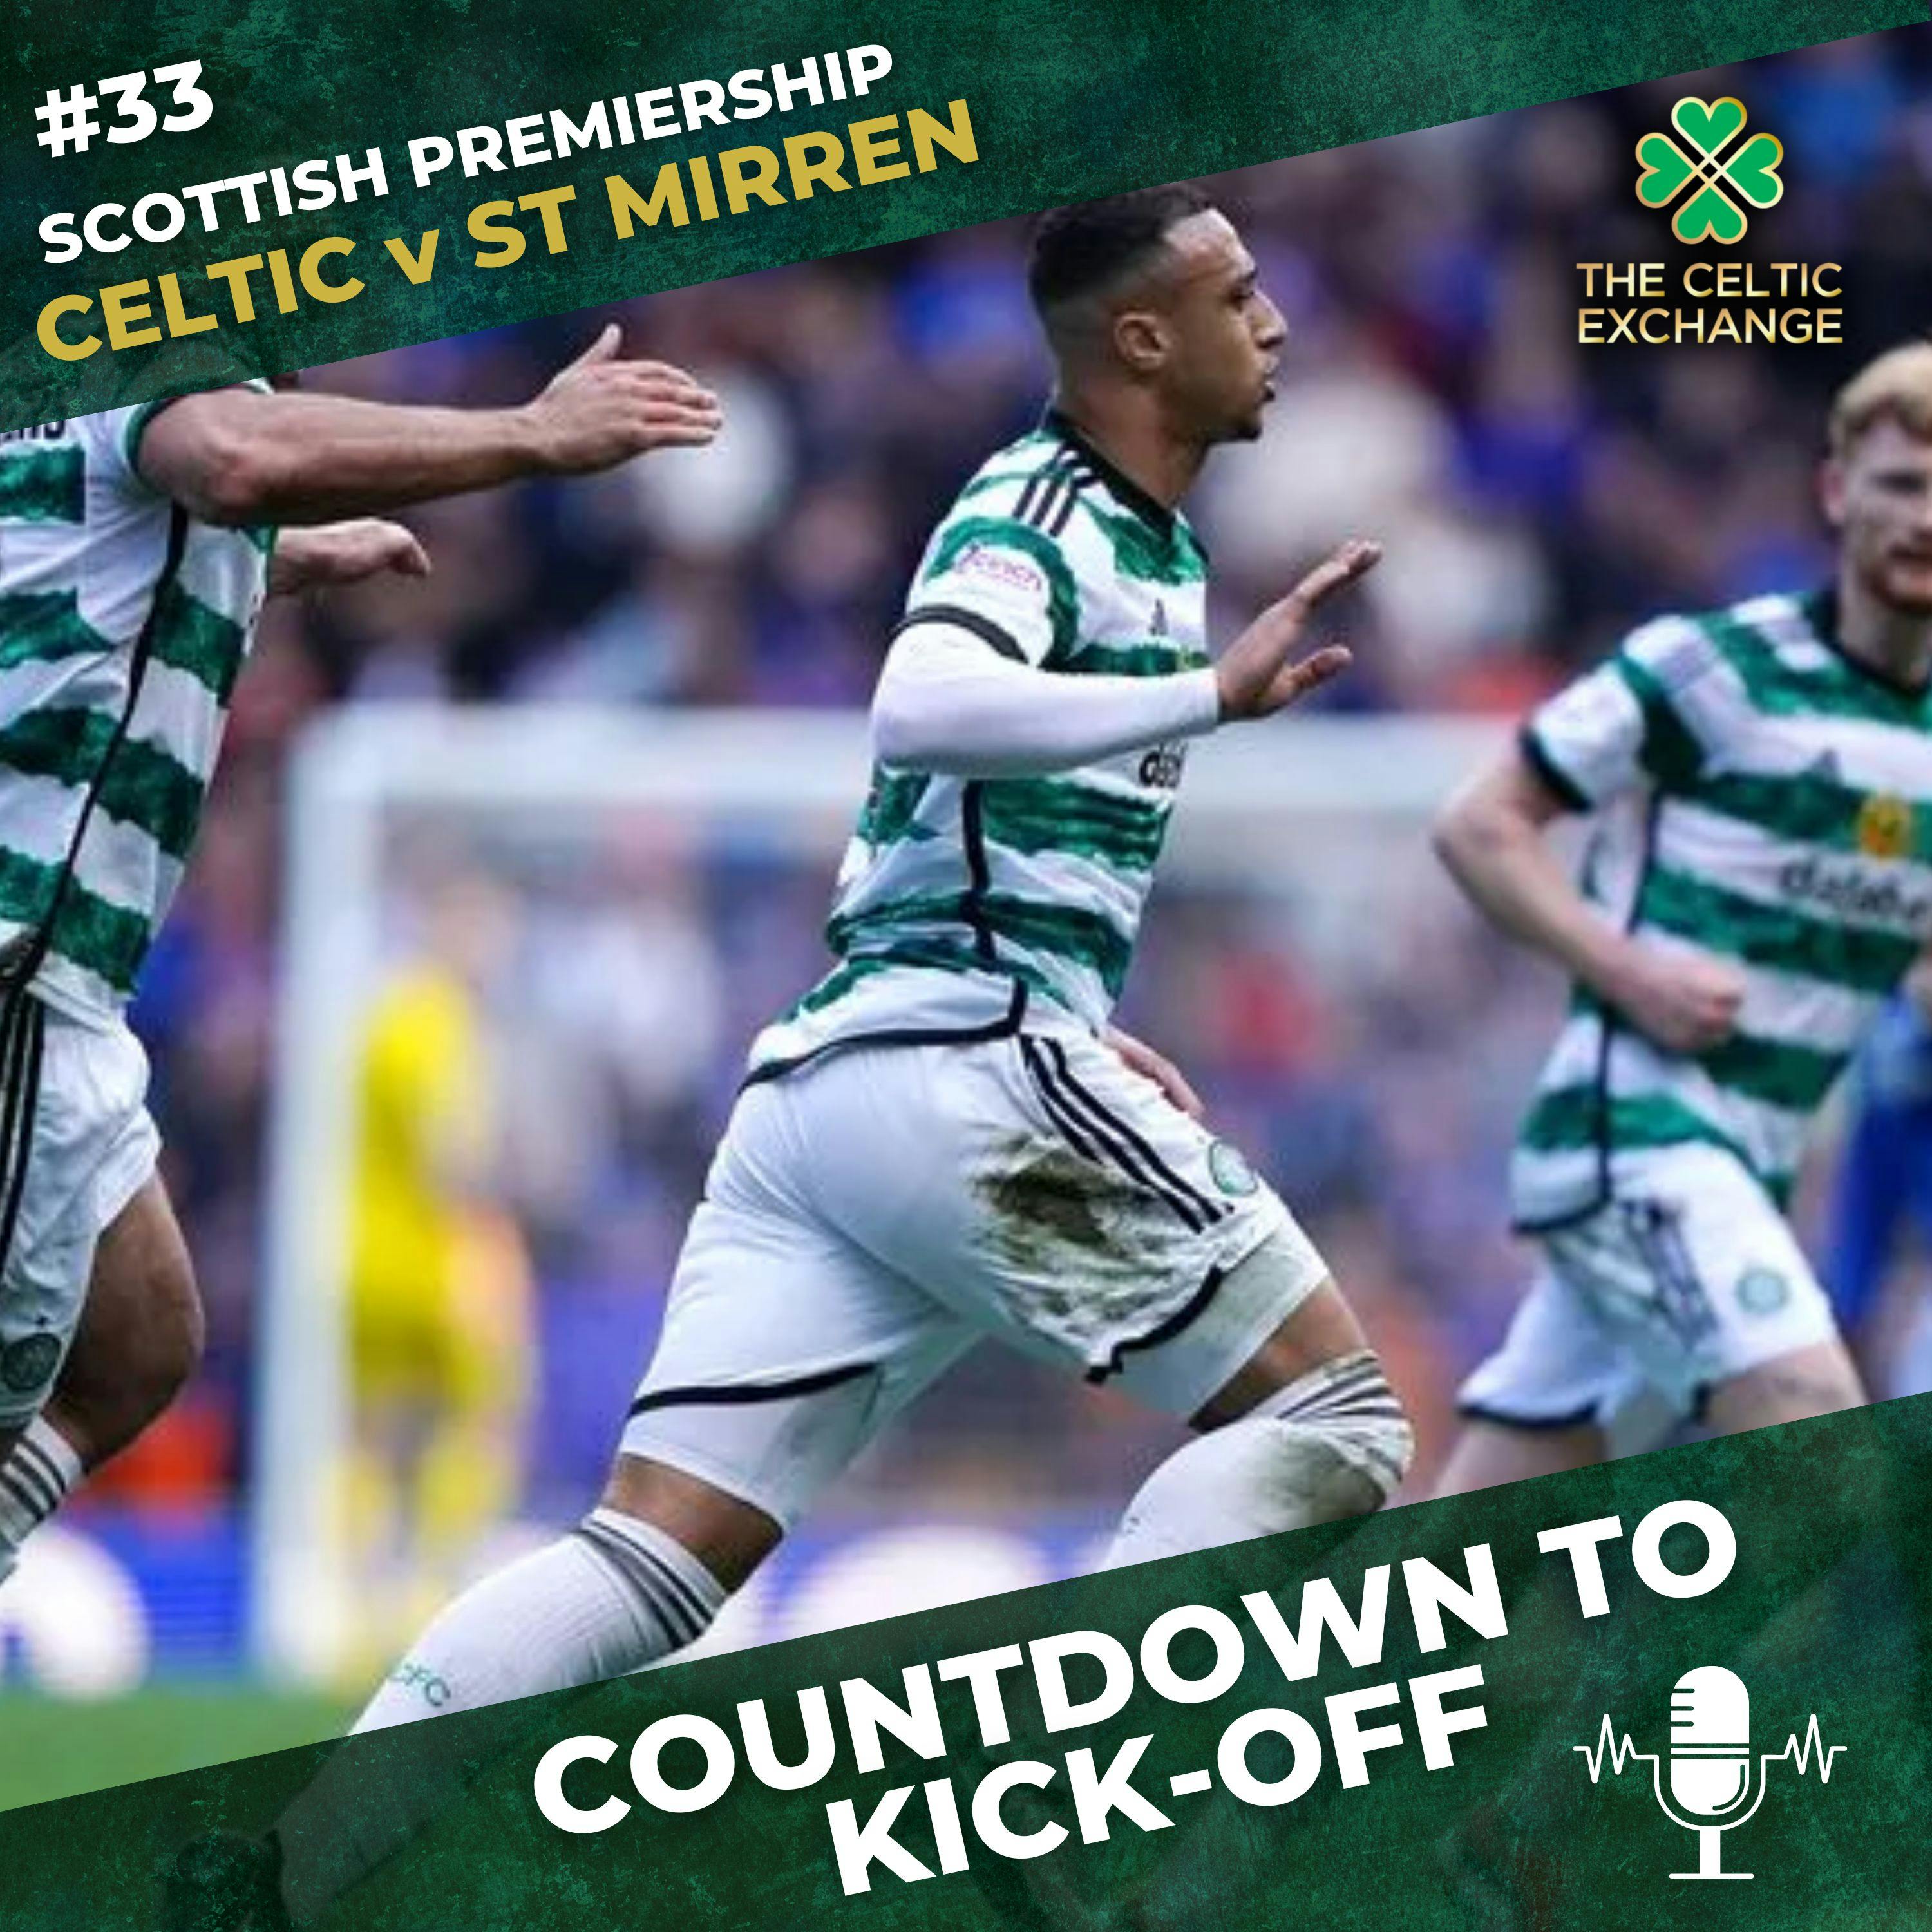 Countdown To Kick Off: Celtic Take On St Mirren Aiming To Open Up A Gap At The Top Of The Table